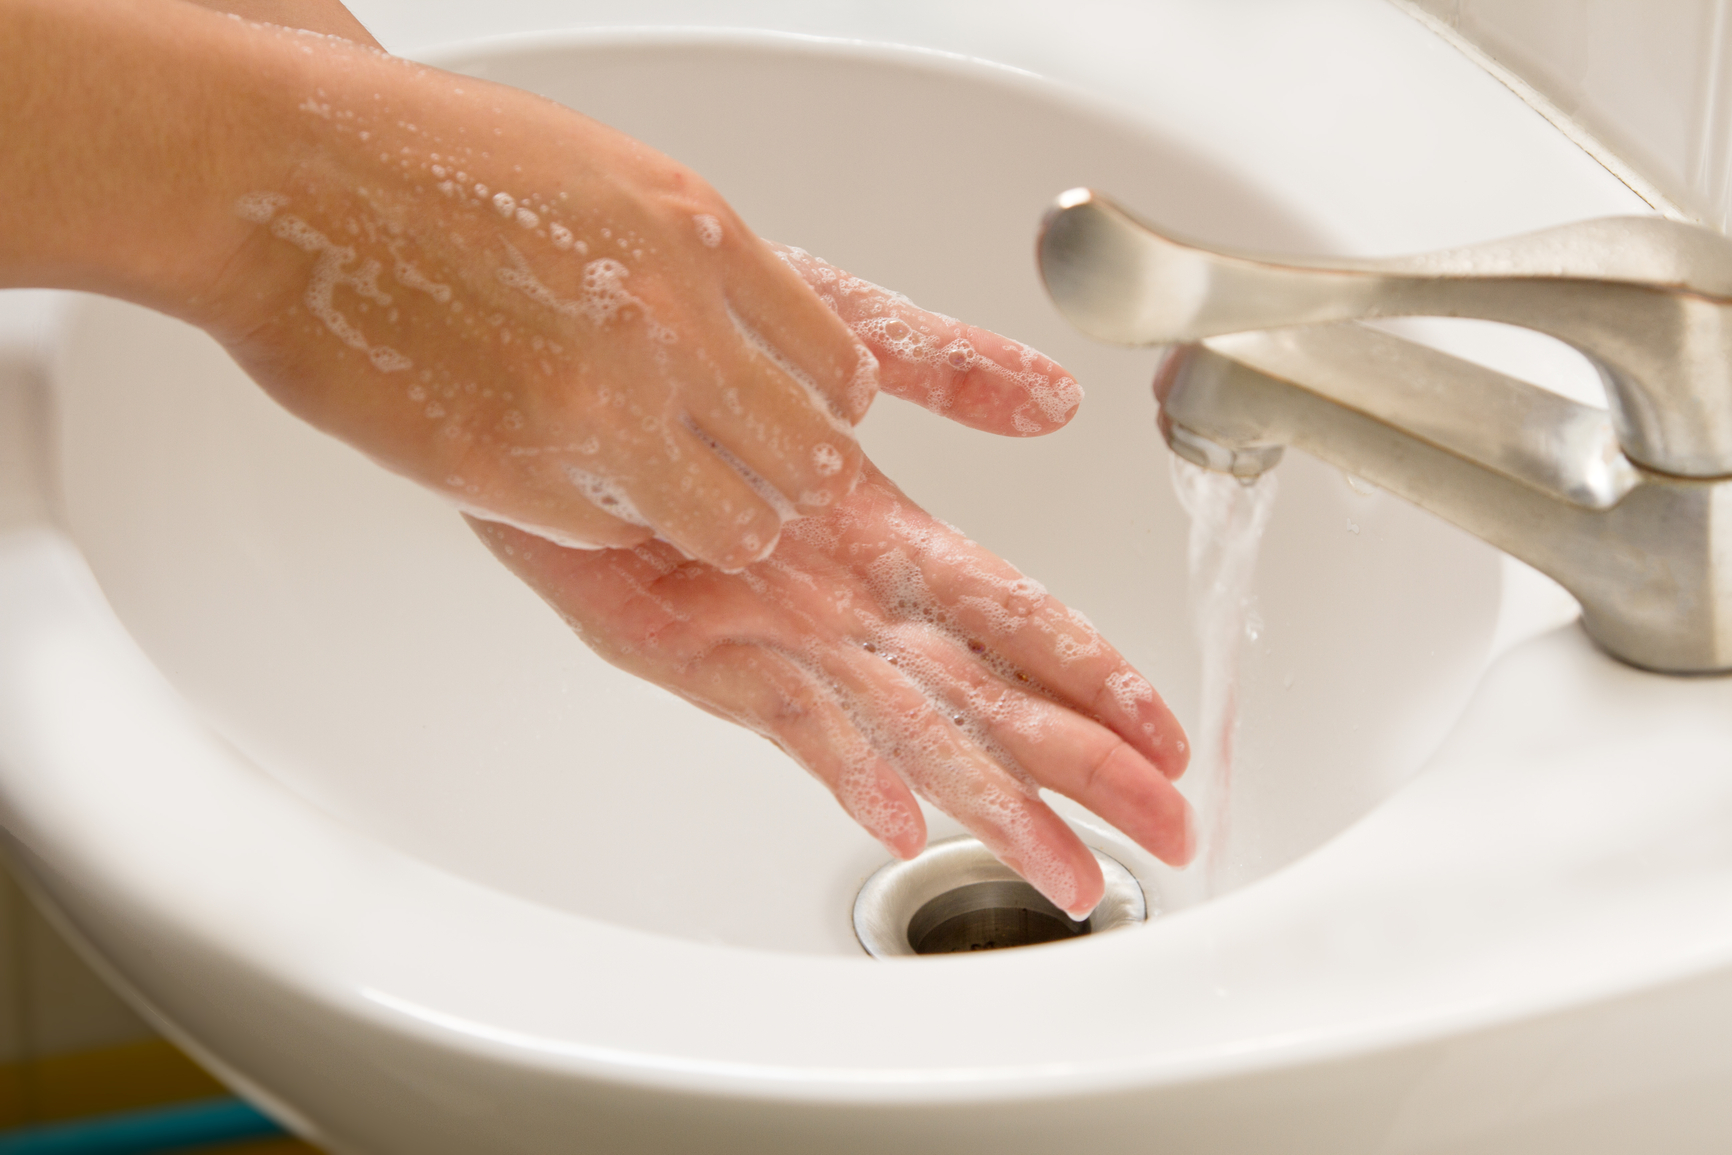 All About Hand Hygiene: How to Wash Your Hands Properly | Glen Martin